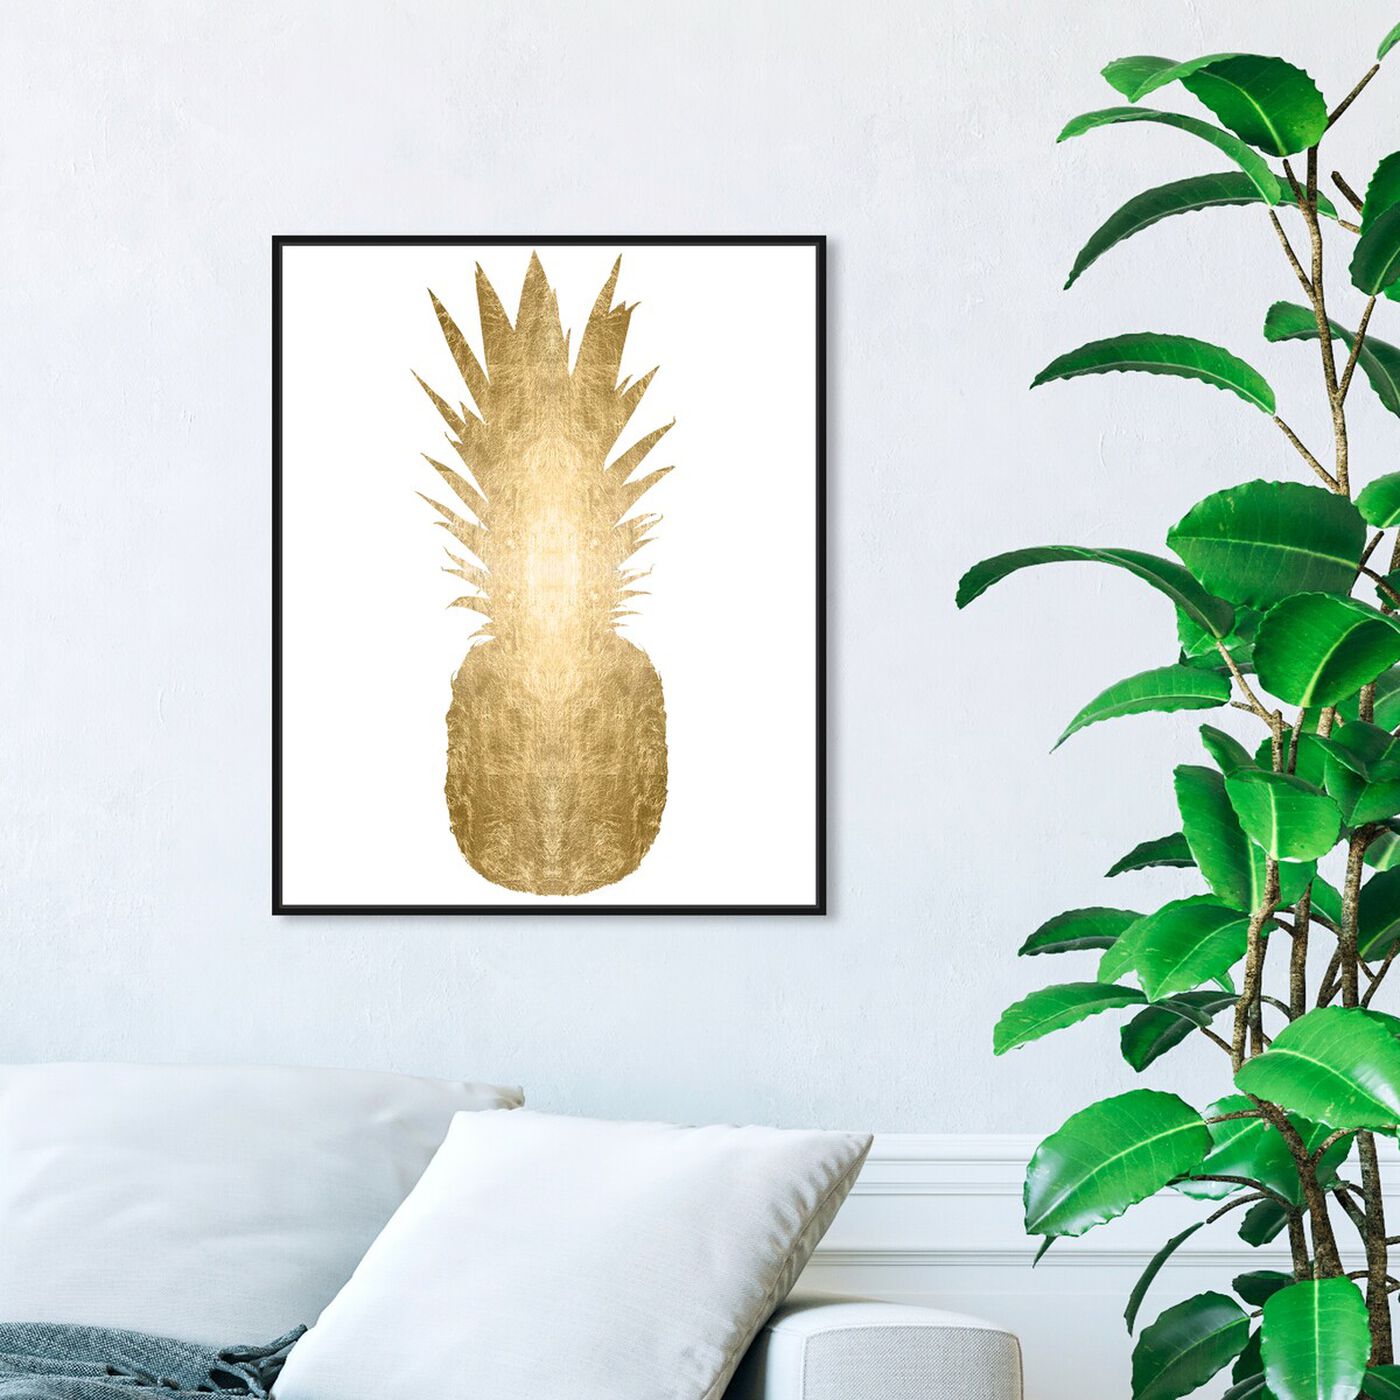 Hanging view of Pineapple Gold Foil featuring food and cuisine and fruits art.